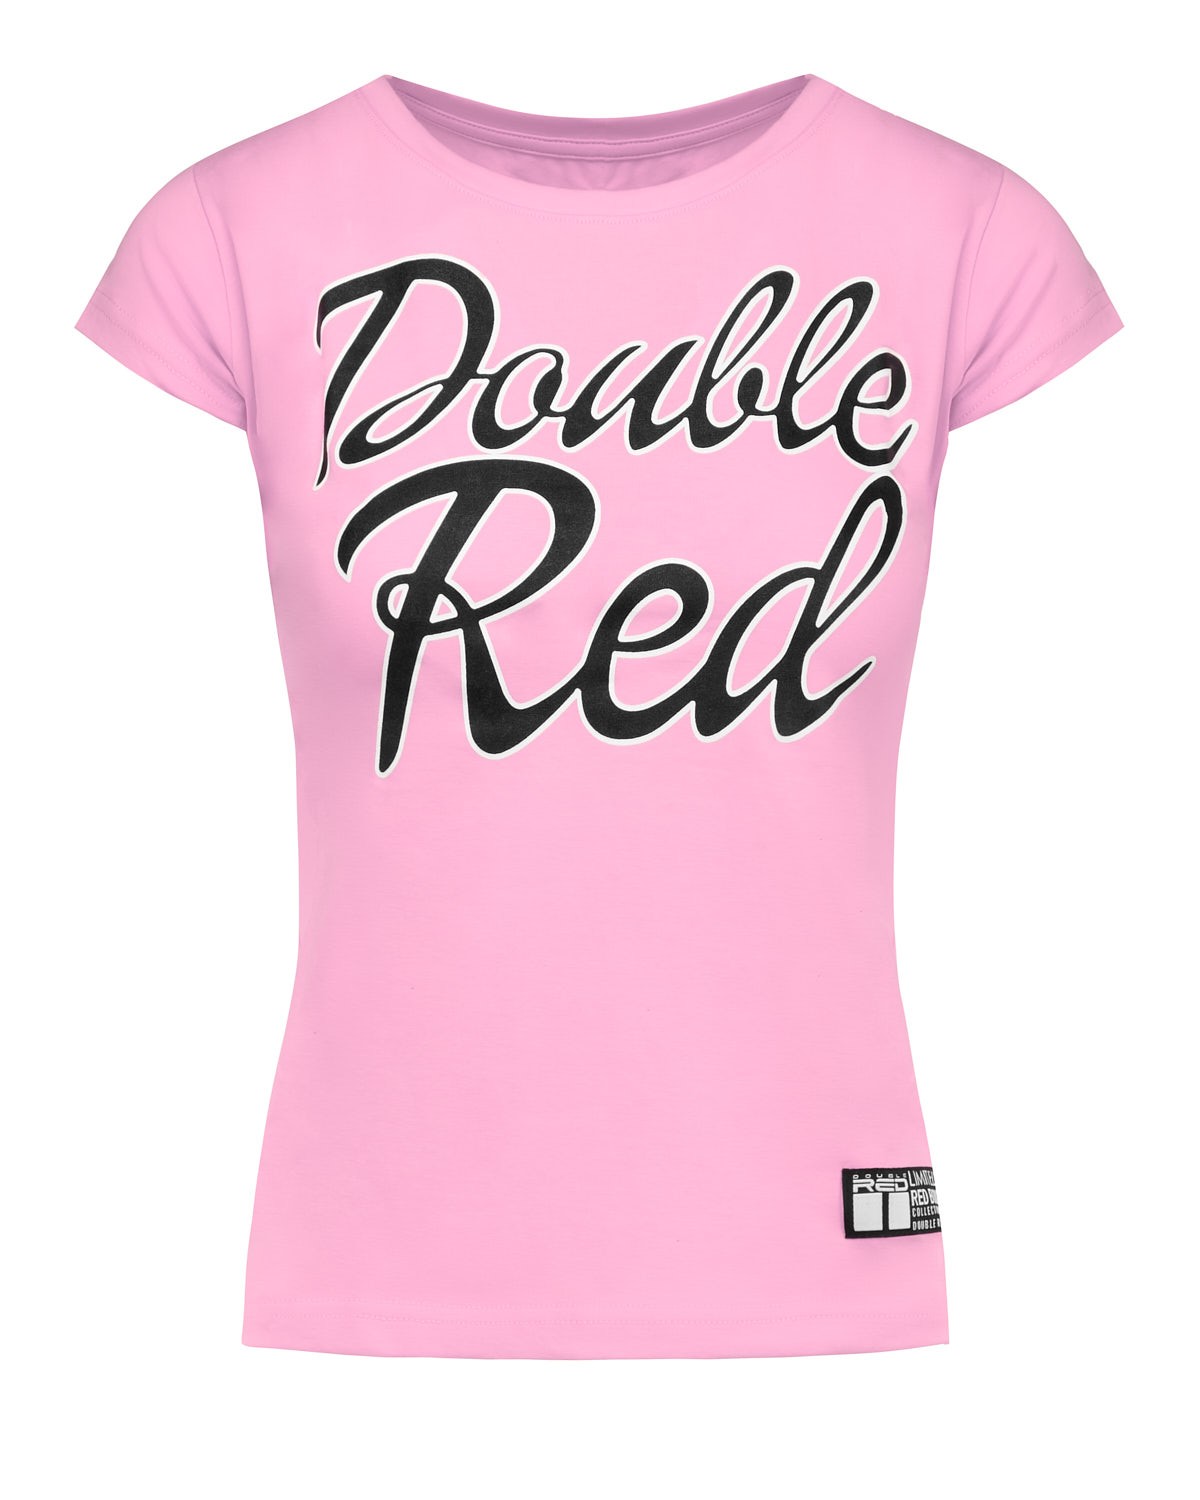 Red Body Collection T-Shirt Pink